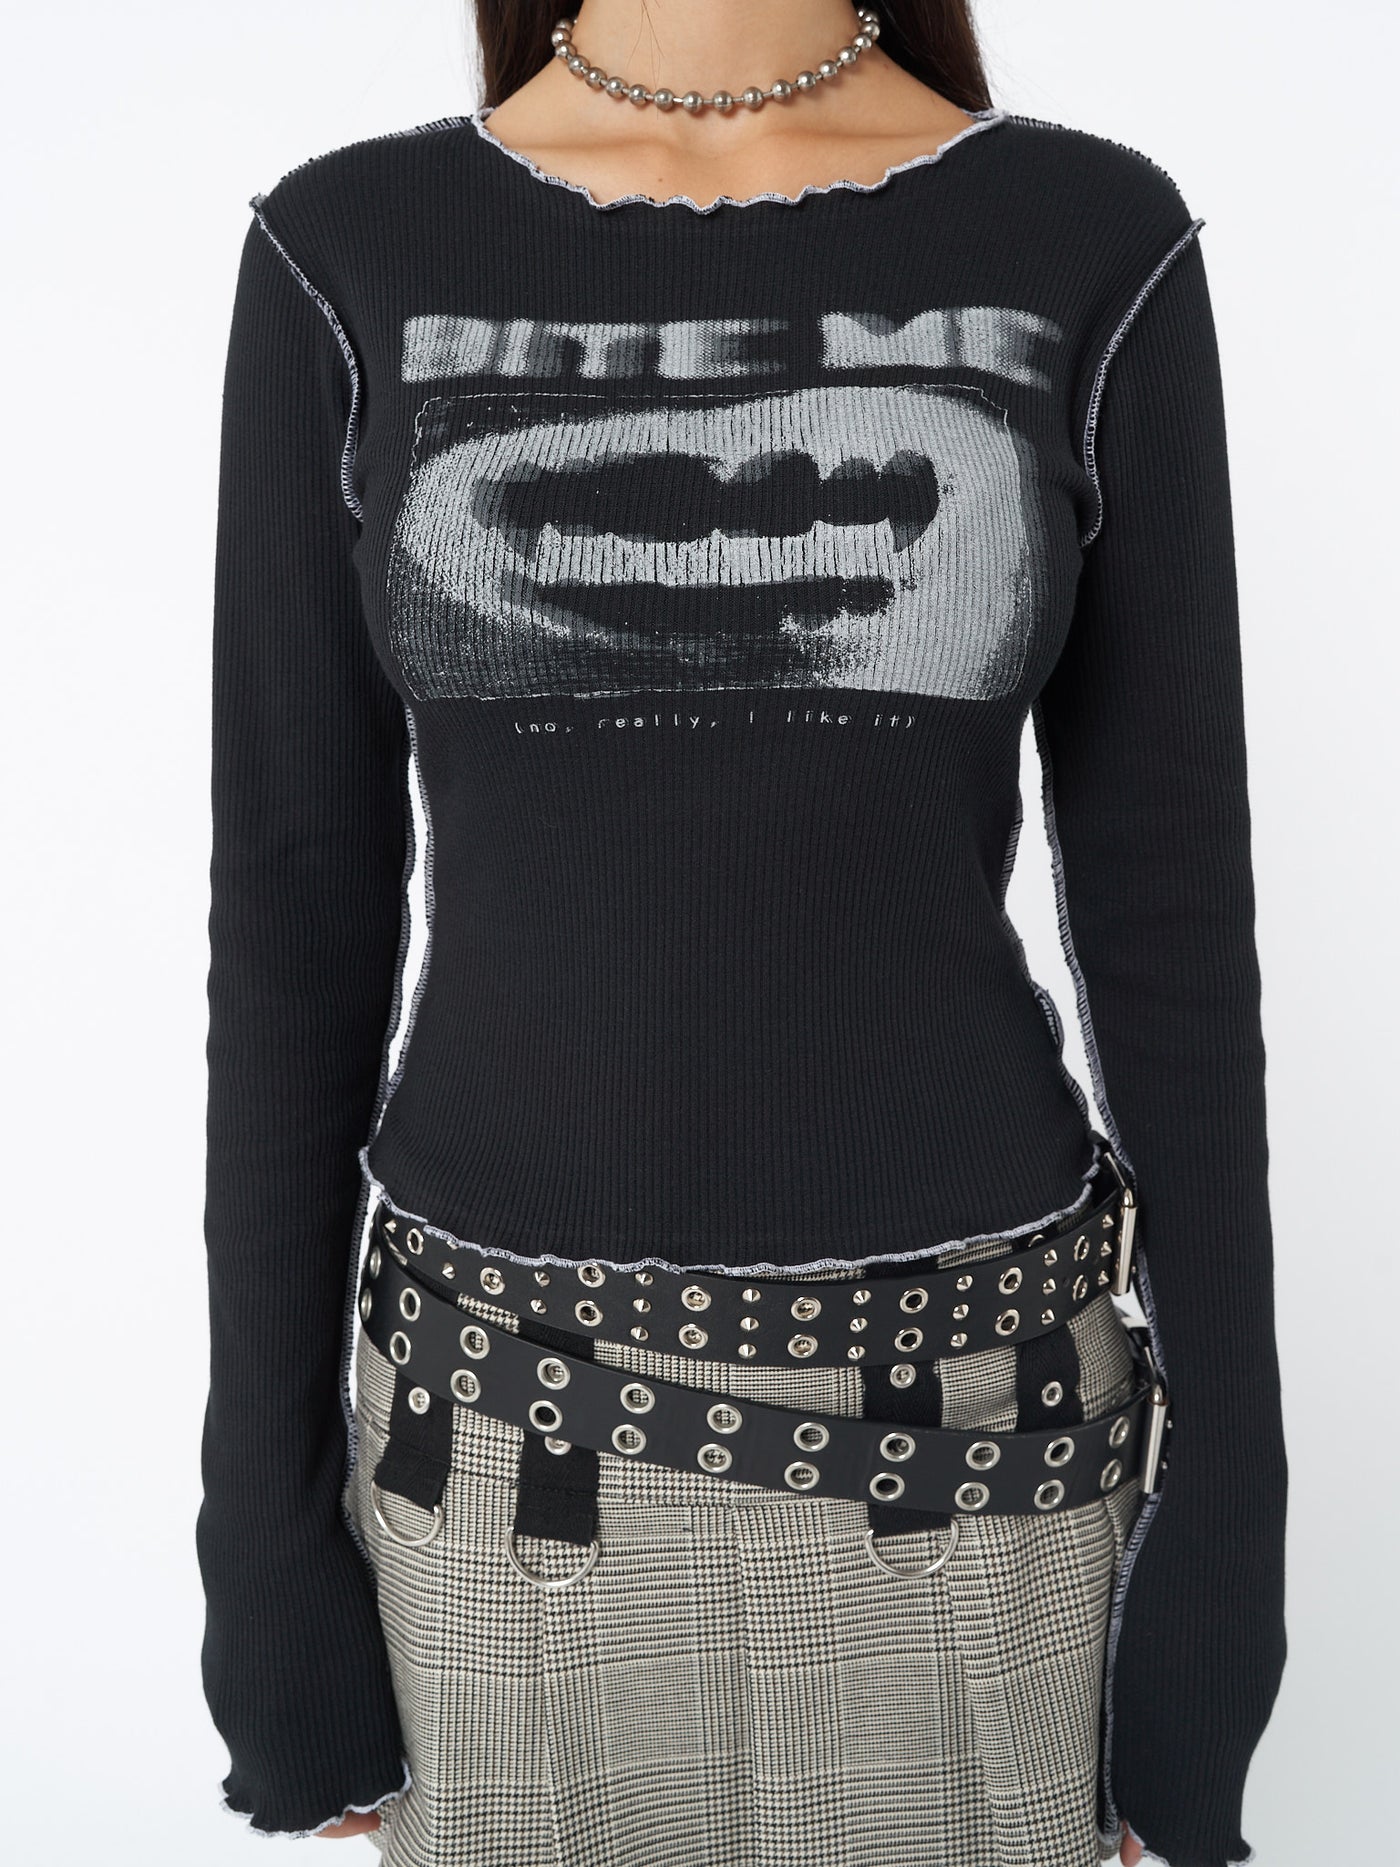 Graphic rib top in black with Bite Me graphic screen print and contrast stitching in white